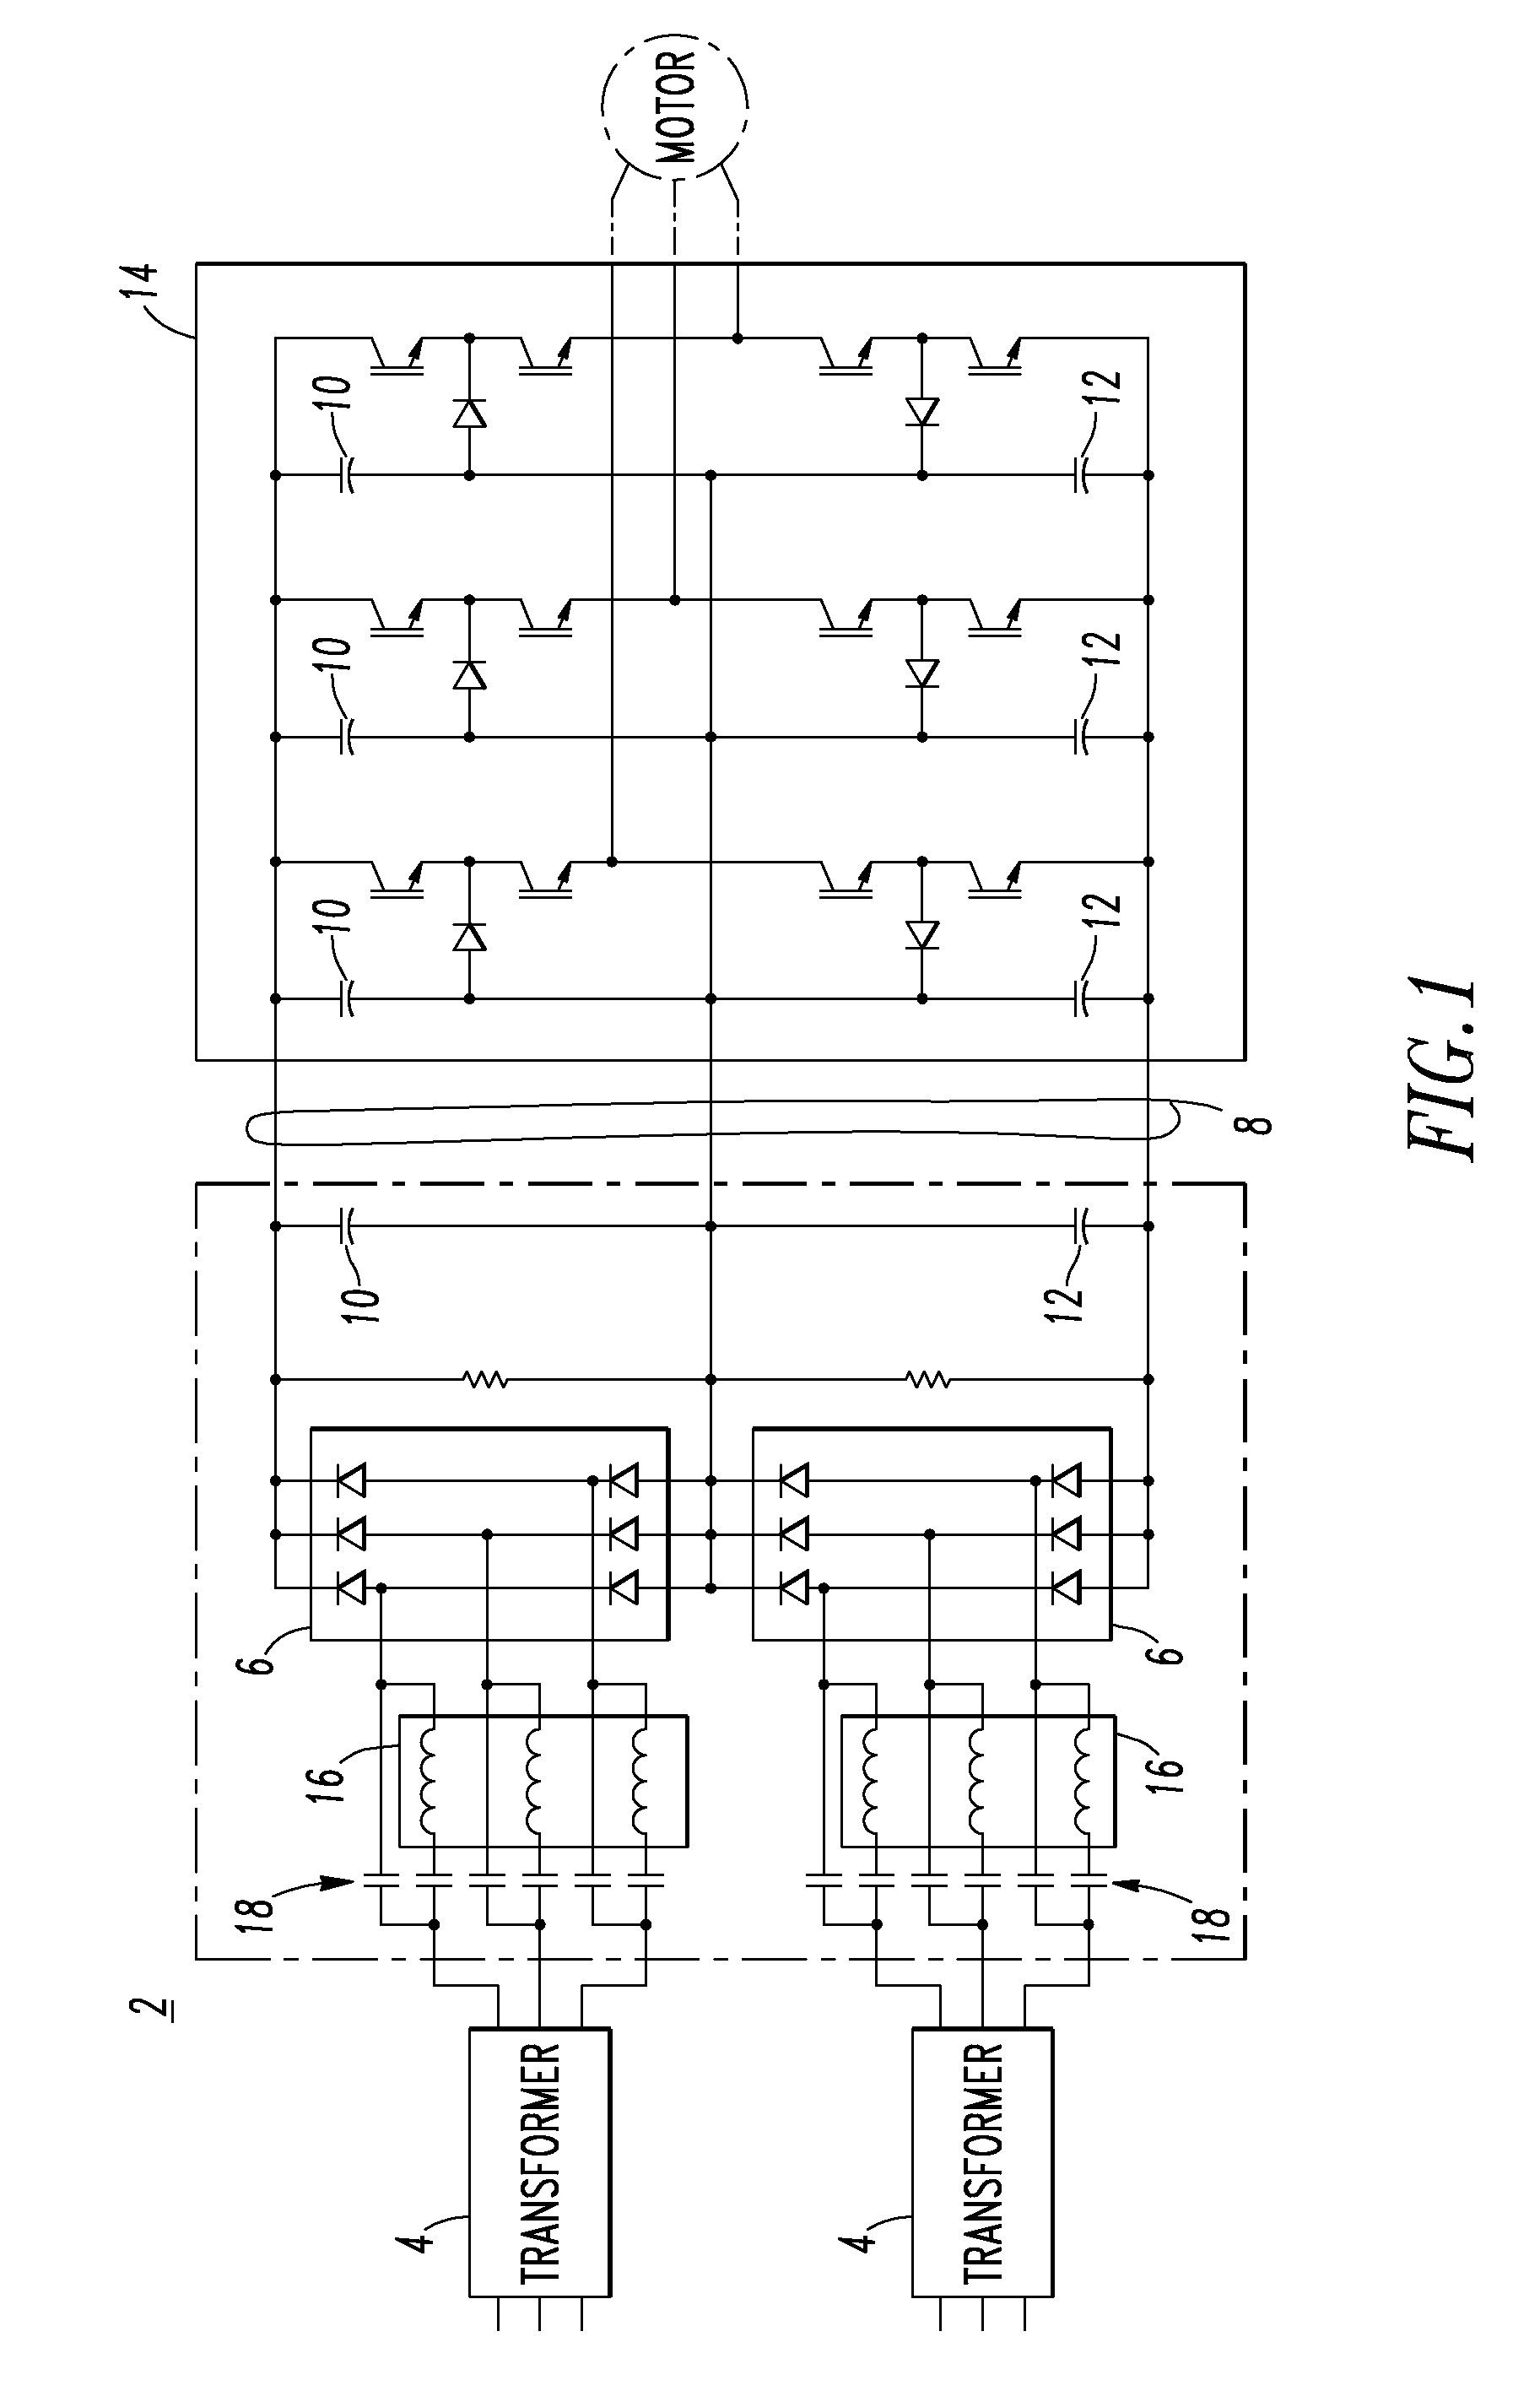 Voltage source inverter and medium voltage pre-charge circuit therefor